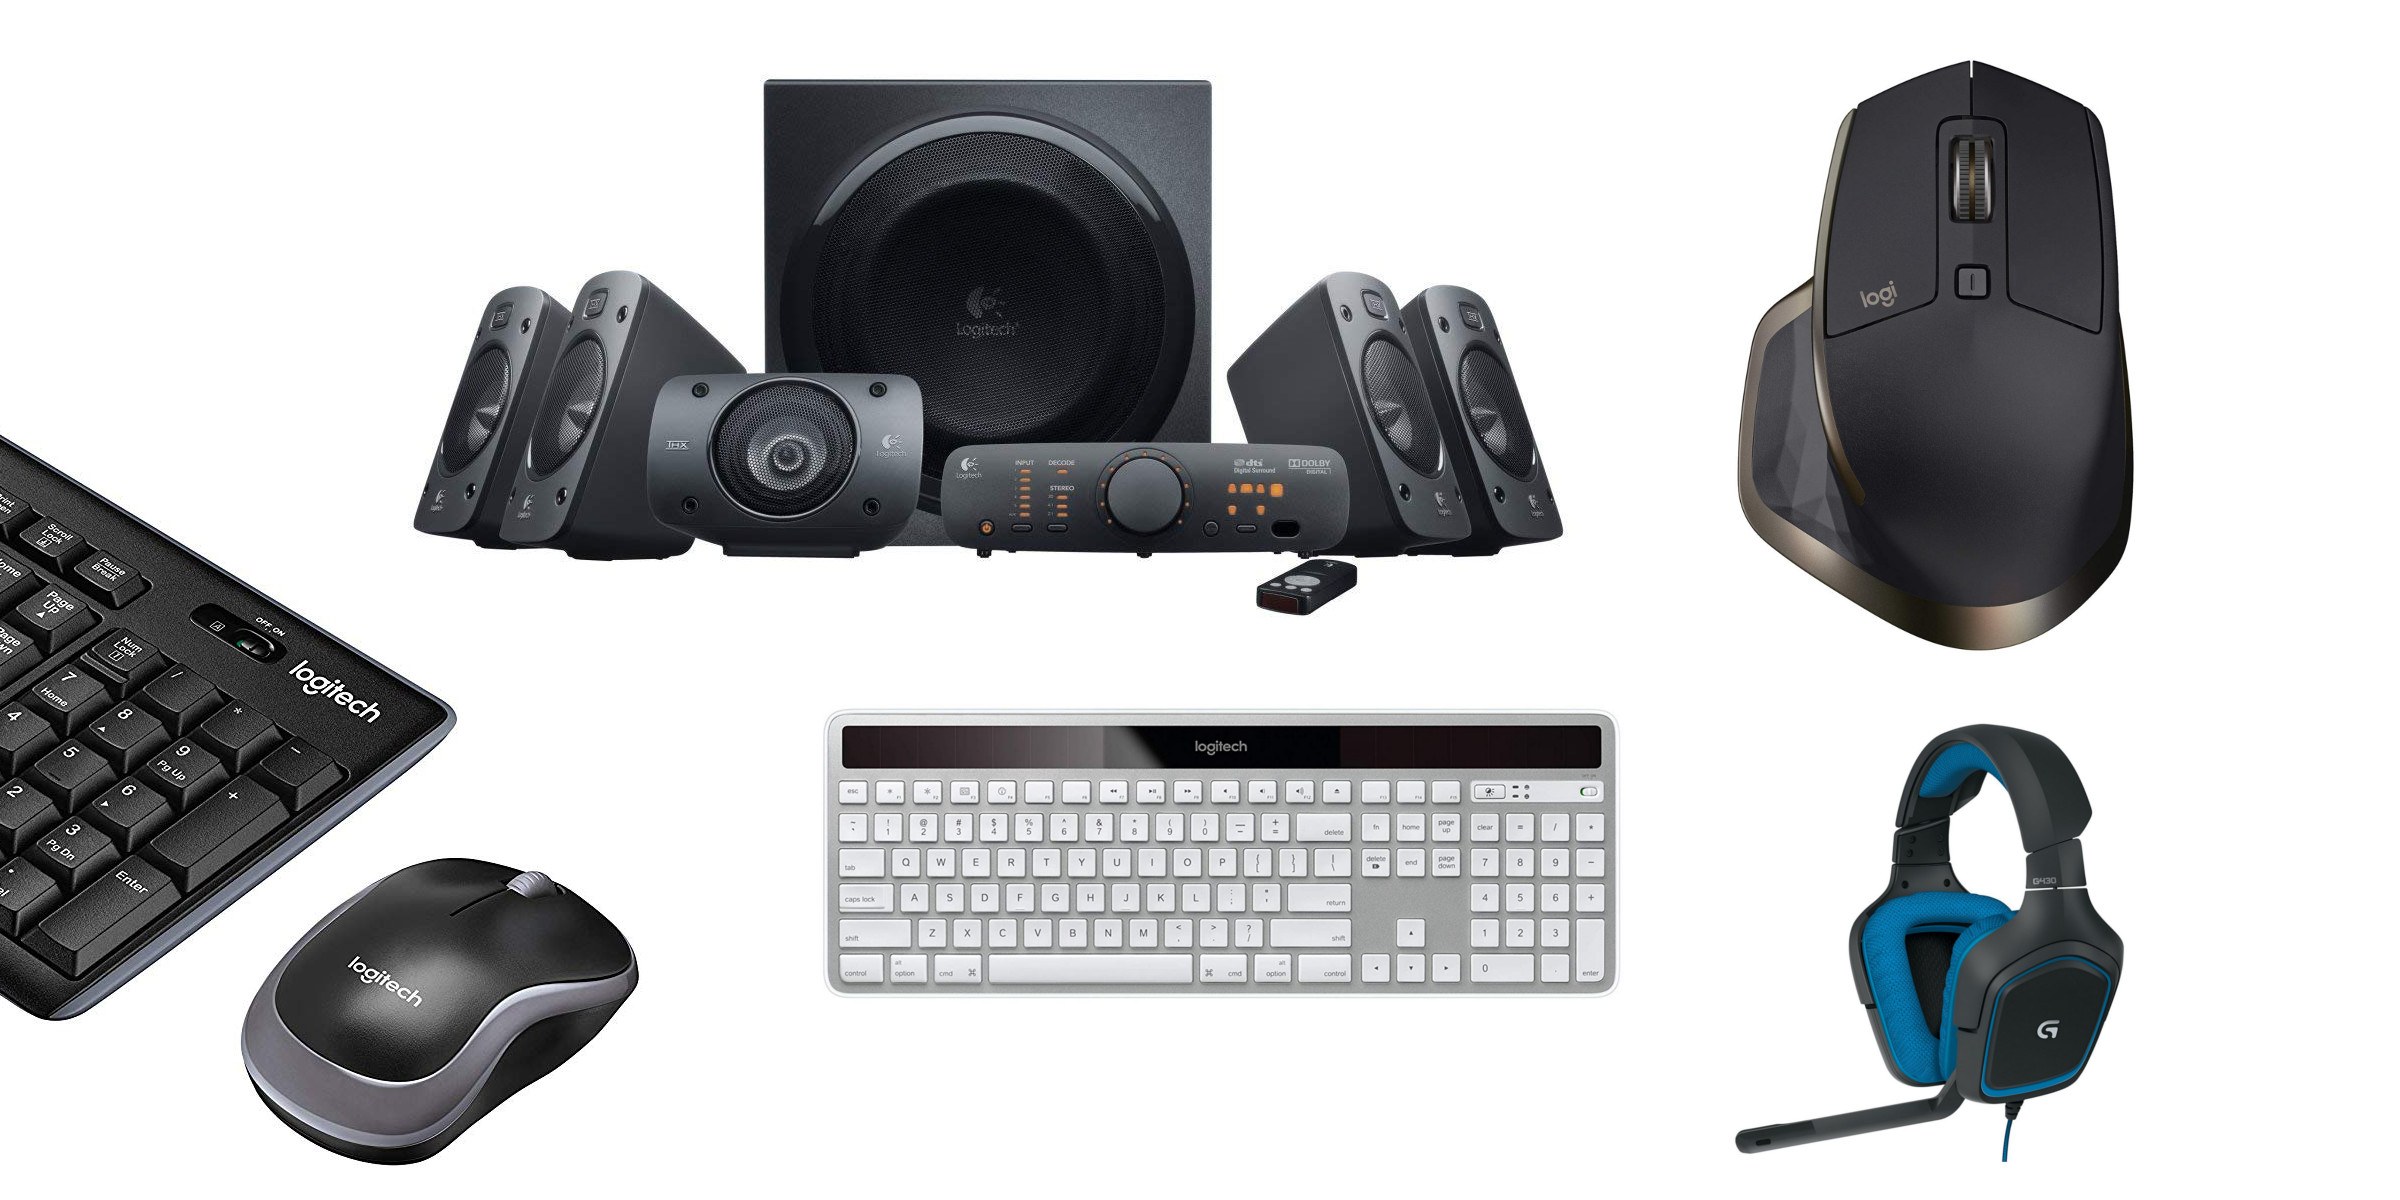 Amazon 1 Day Logitech Sale From 14 Mac Keyboards Mice Gaming Headsets Much More 9to5toys